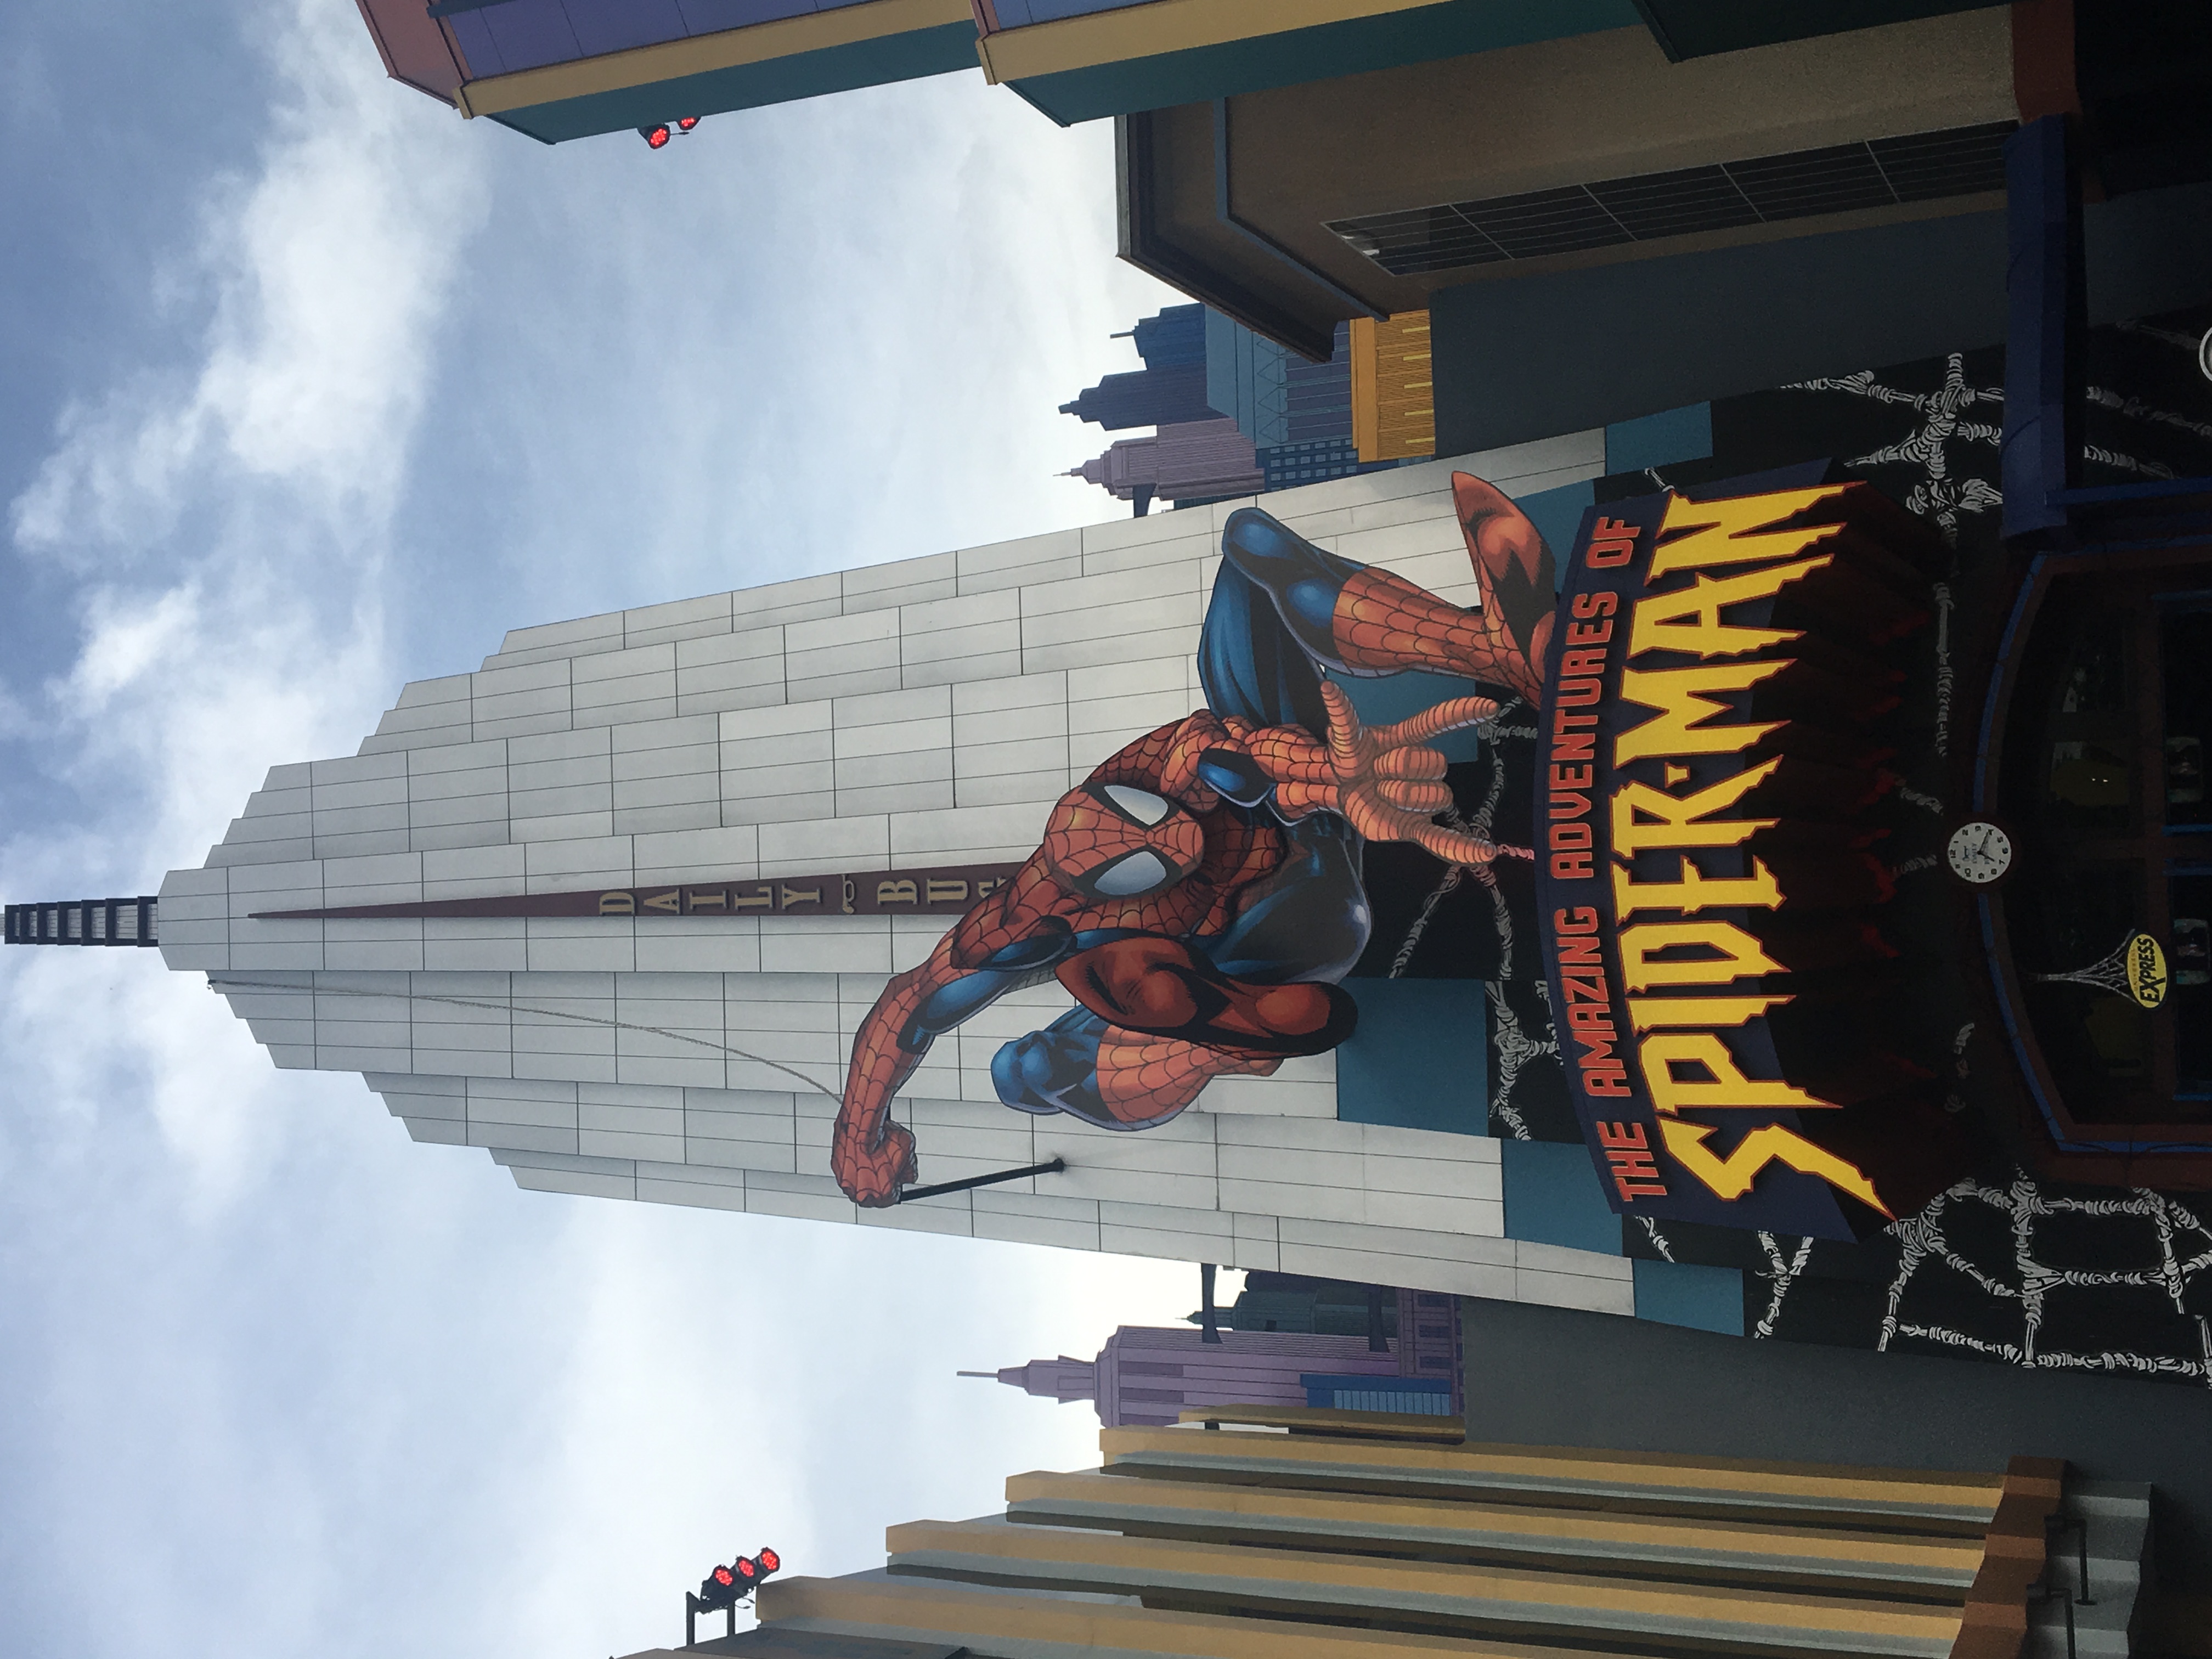 The Amazing Adventures of Spider-Man | Universal Parks and Resorts Wiki |  Fandom